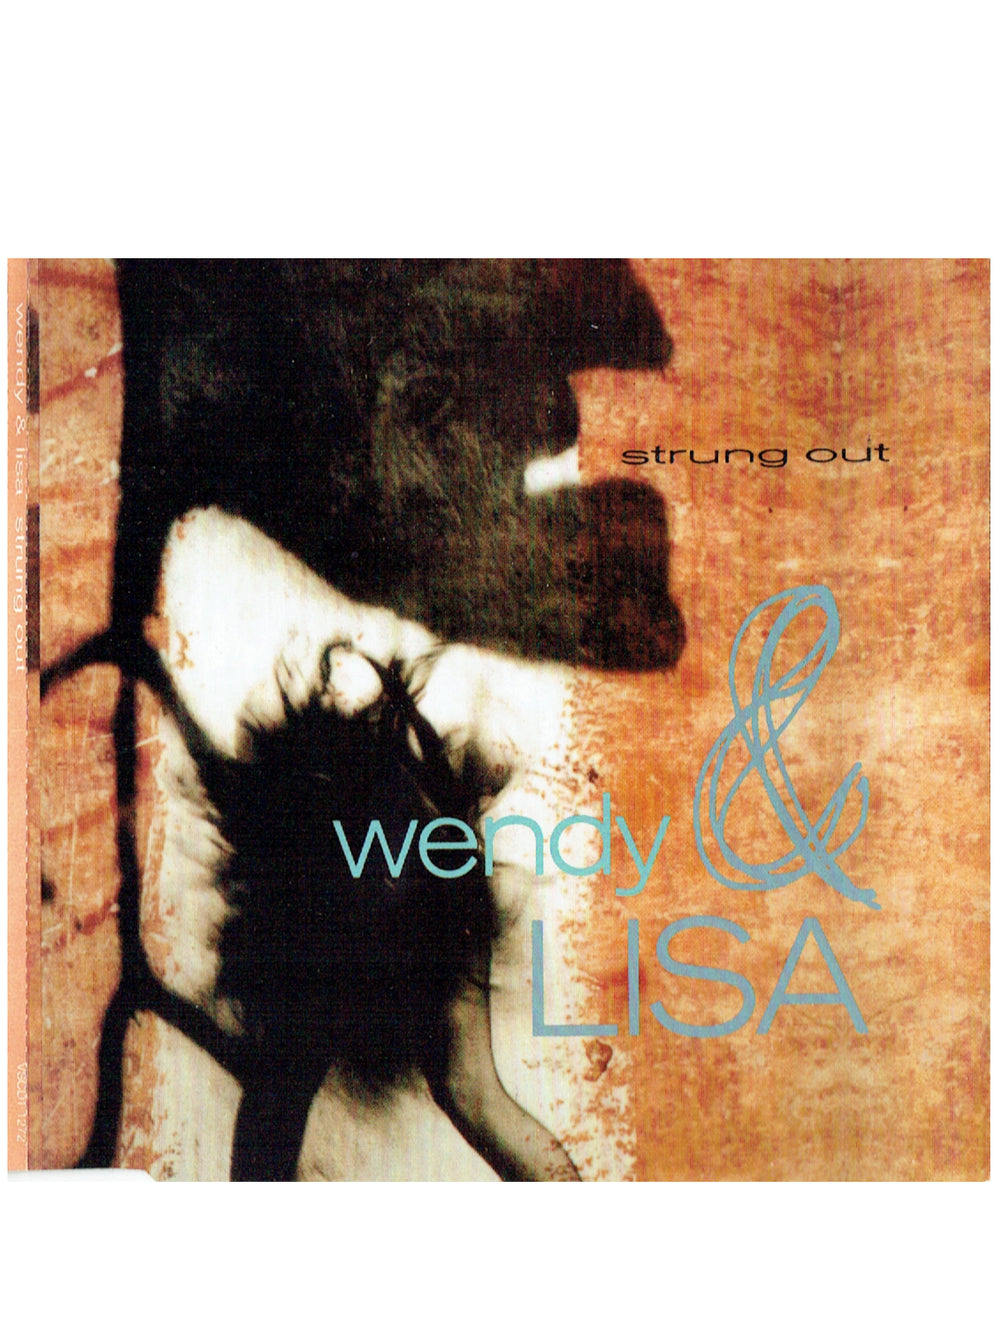 Prince – Wendy & Lisa Strung Out CD Single 1989 UK Release With Re Mixes Prince